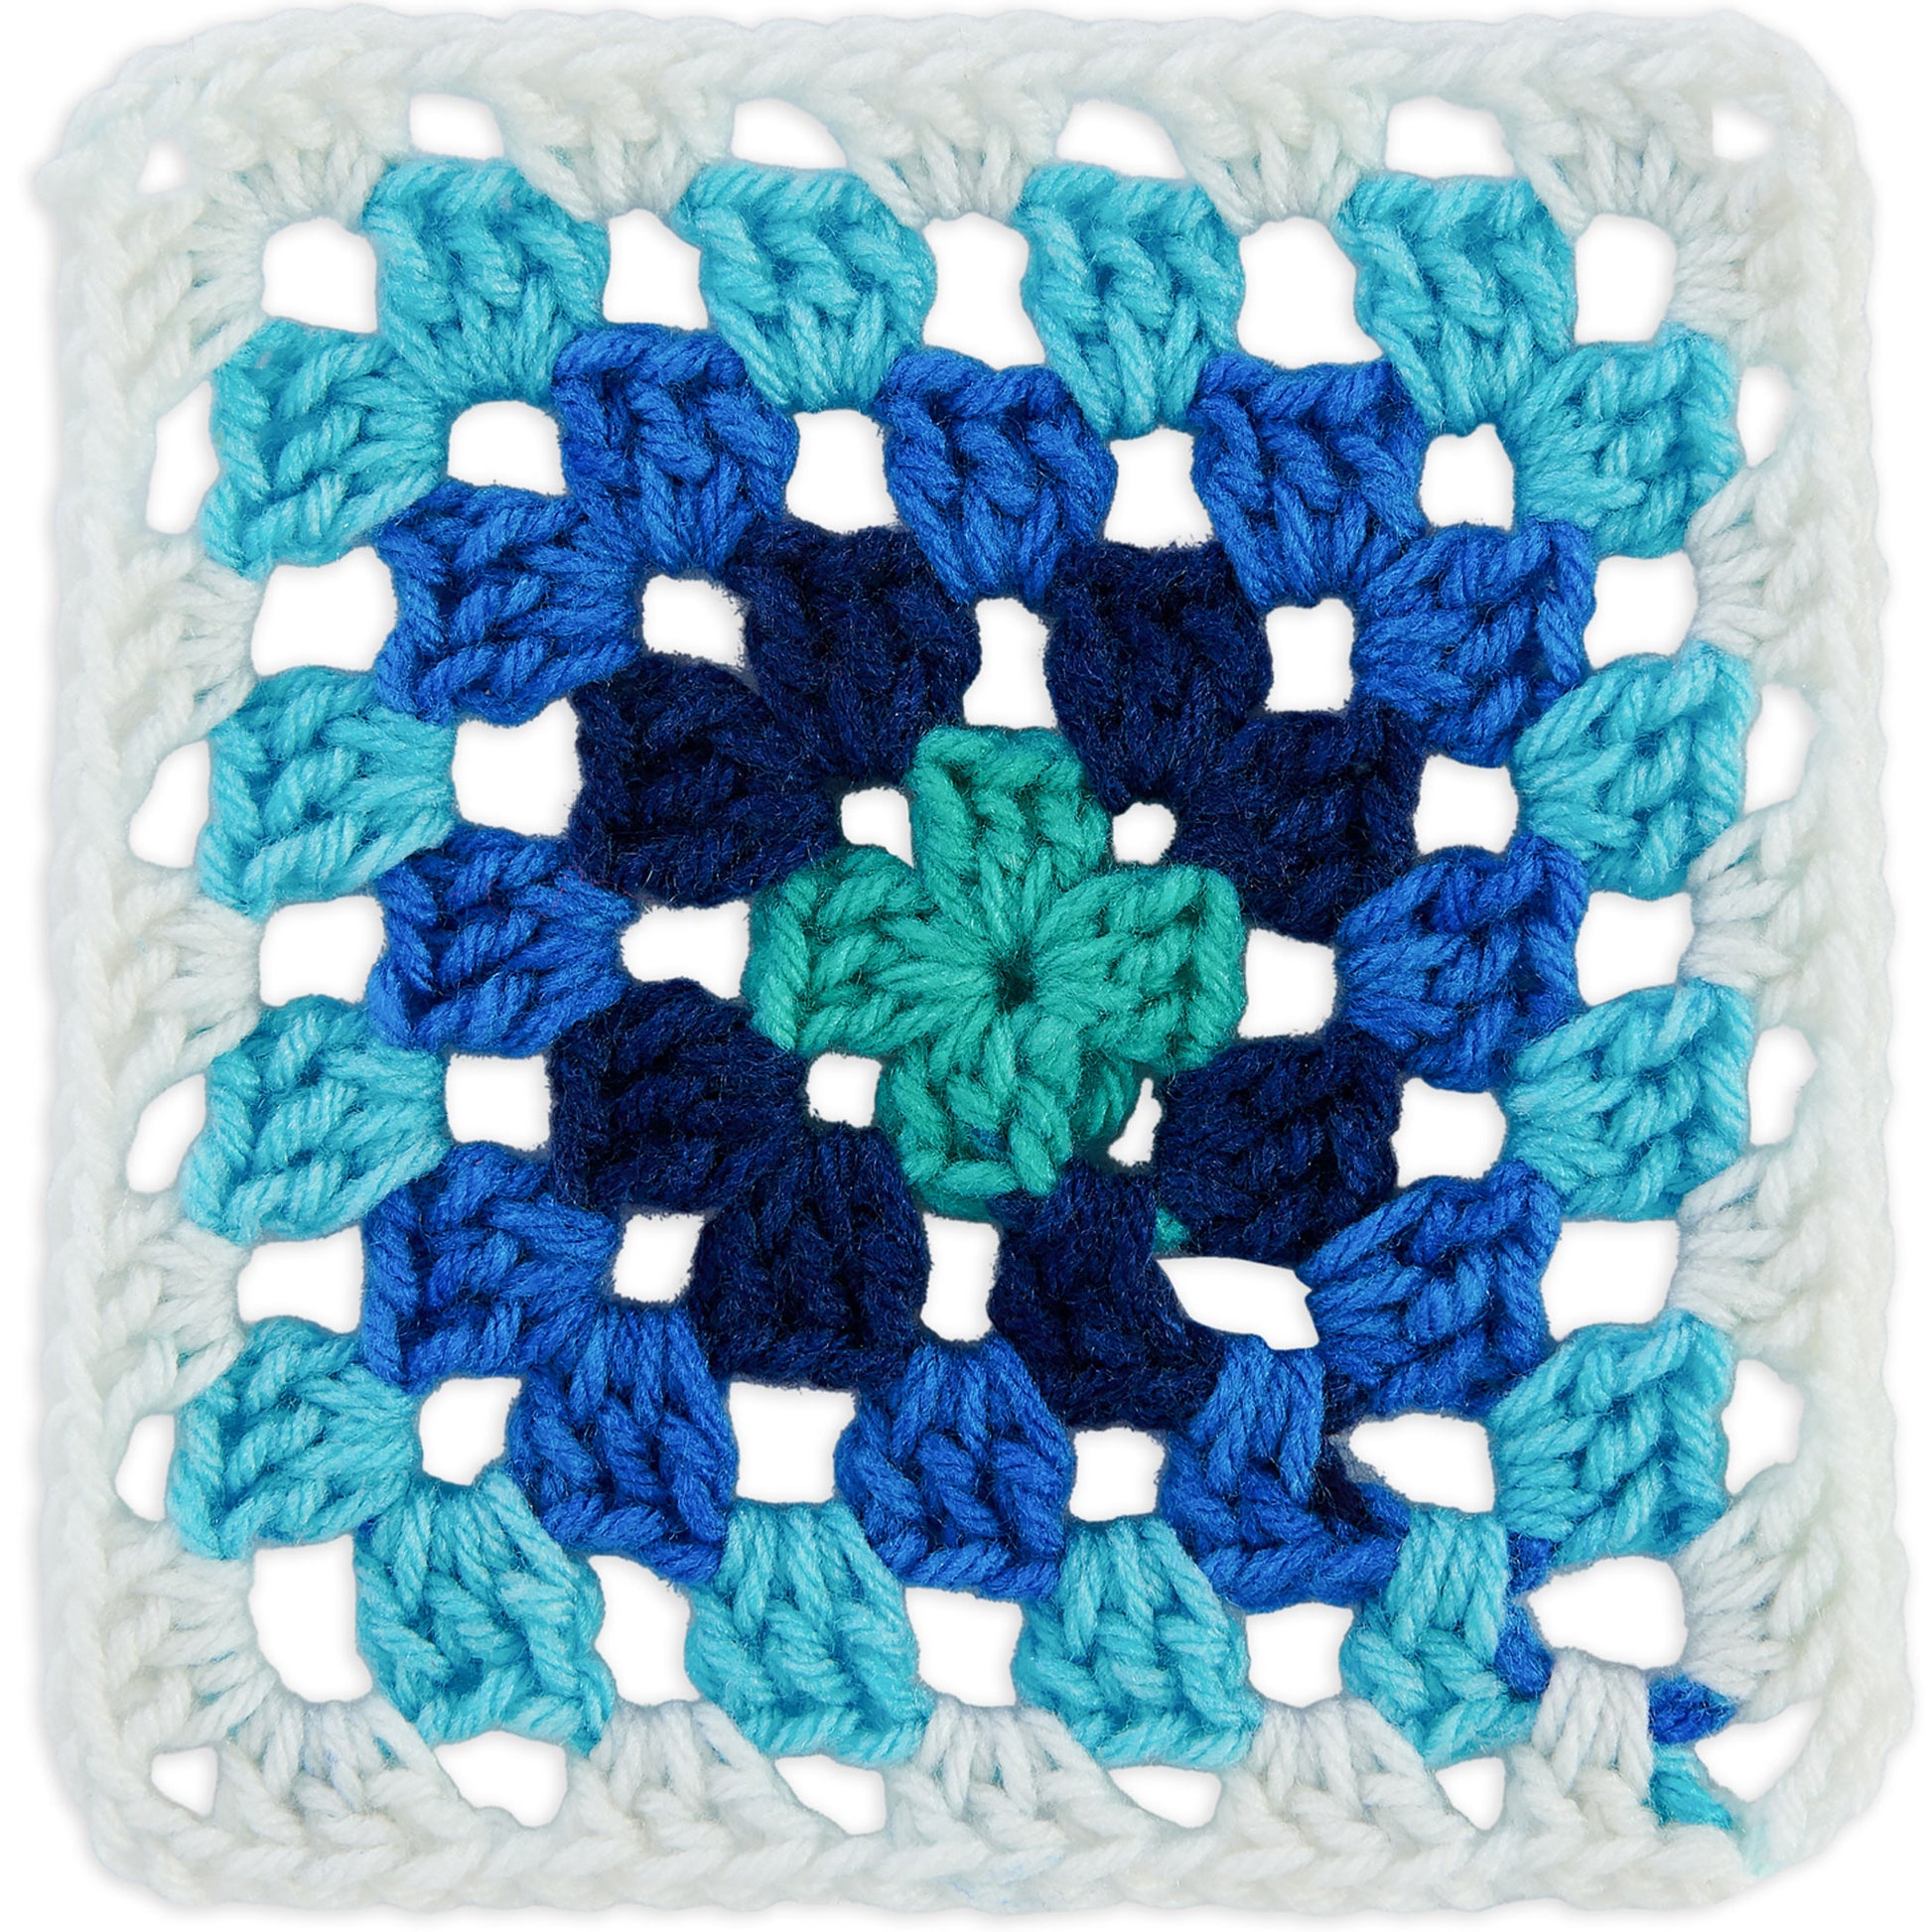 Red Heart All-In-One Granny Square